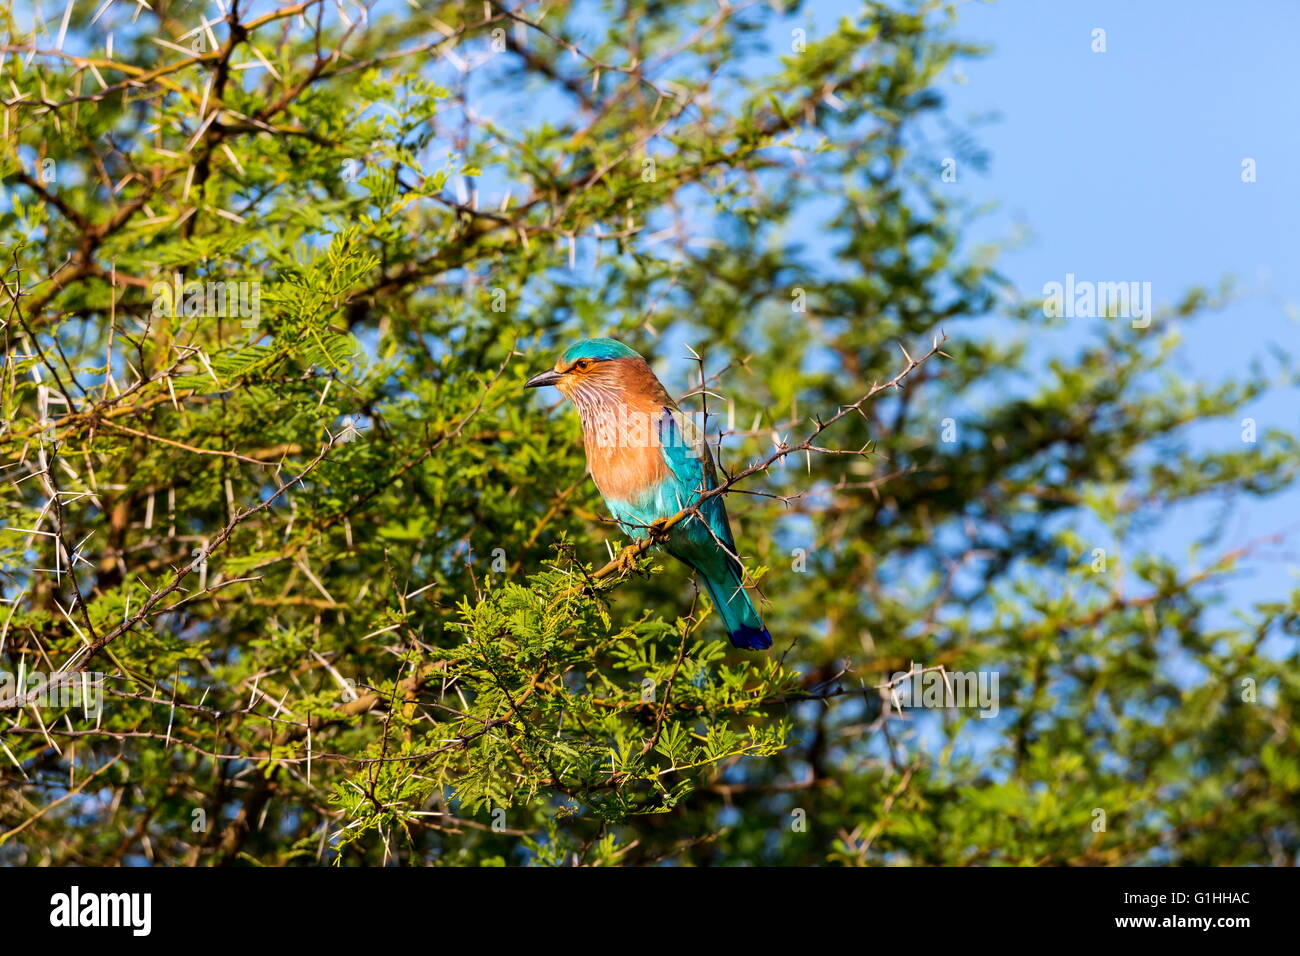 Indian Roller, a very colorful bird native of India. Stock Photo